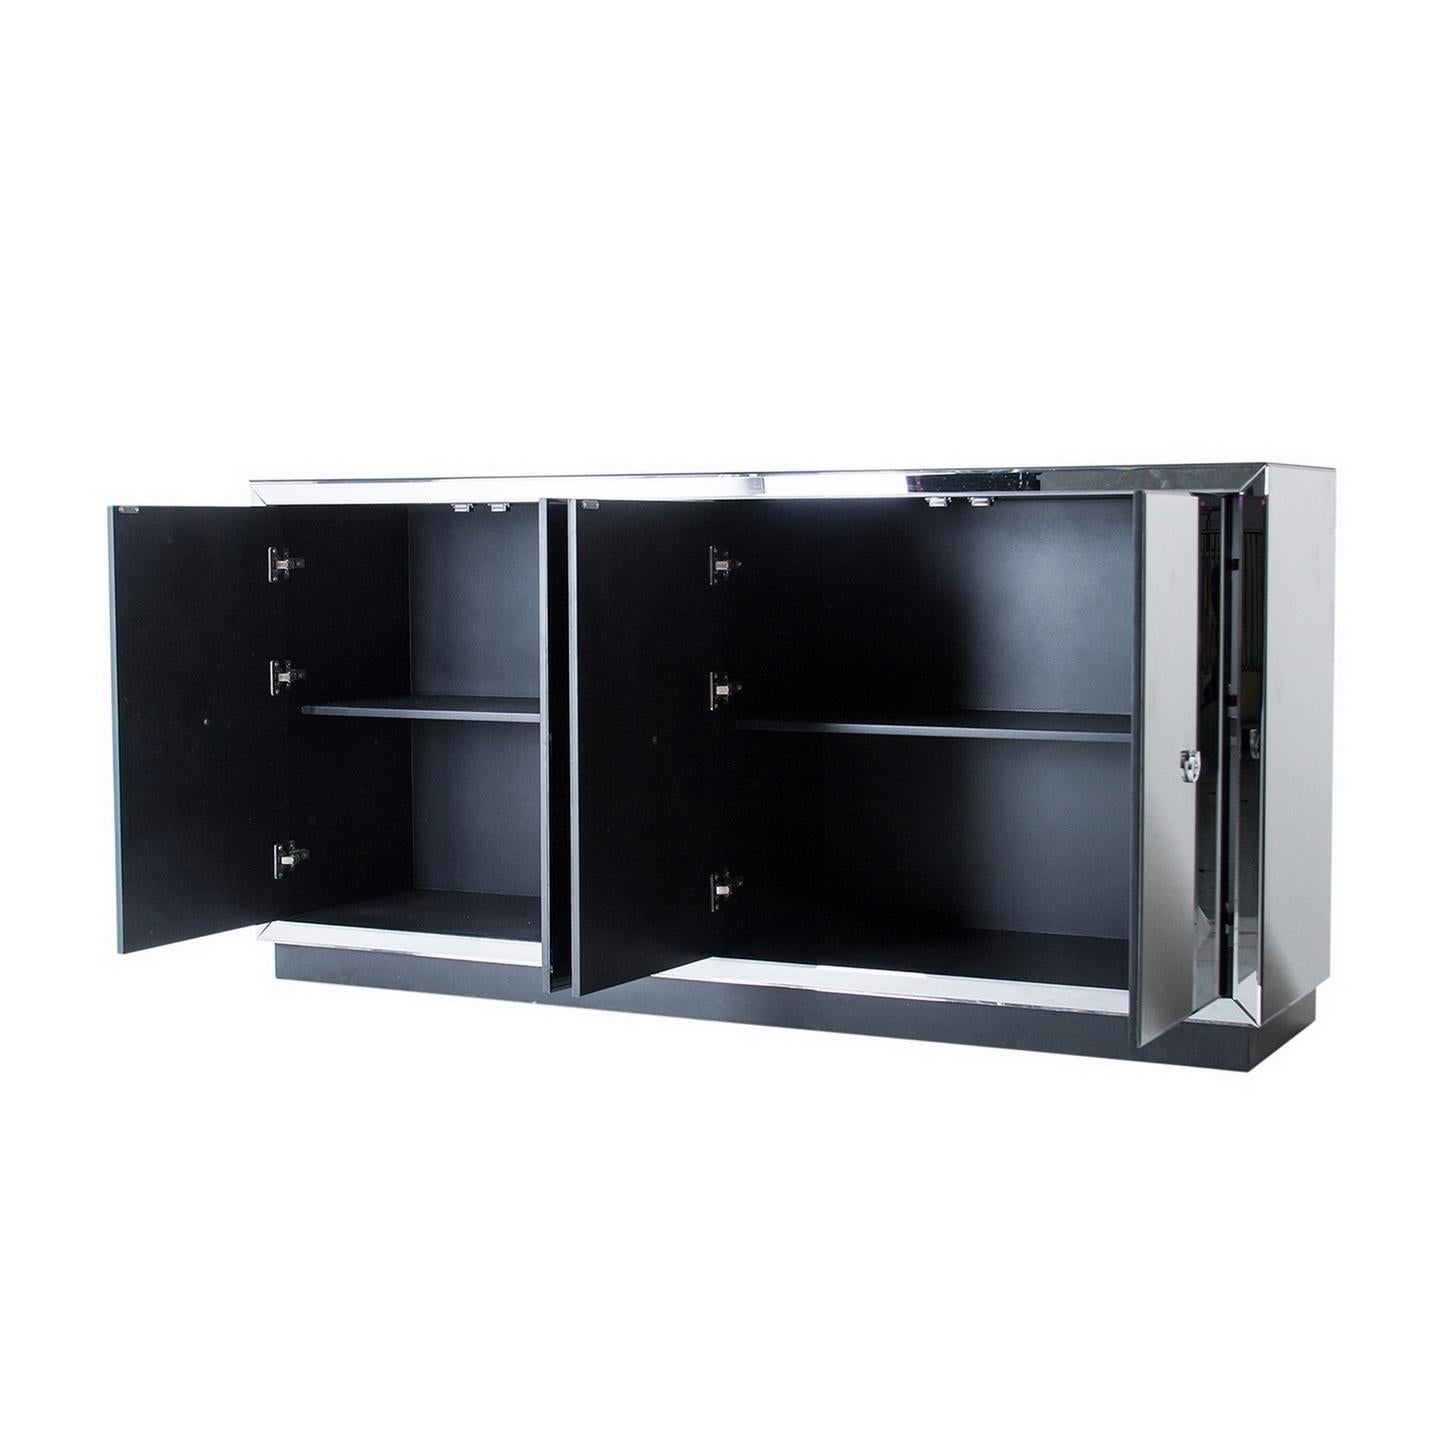 Sparkling and sophisticated mirrored sideboard with chrome finish handles, four mirrored graphic panels doors opening on shelves.